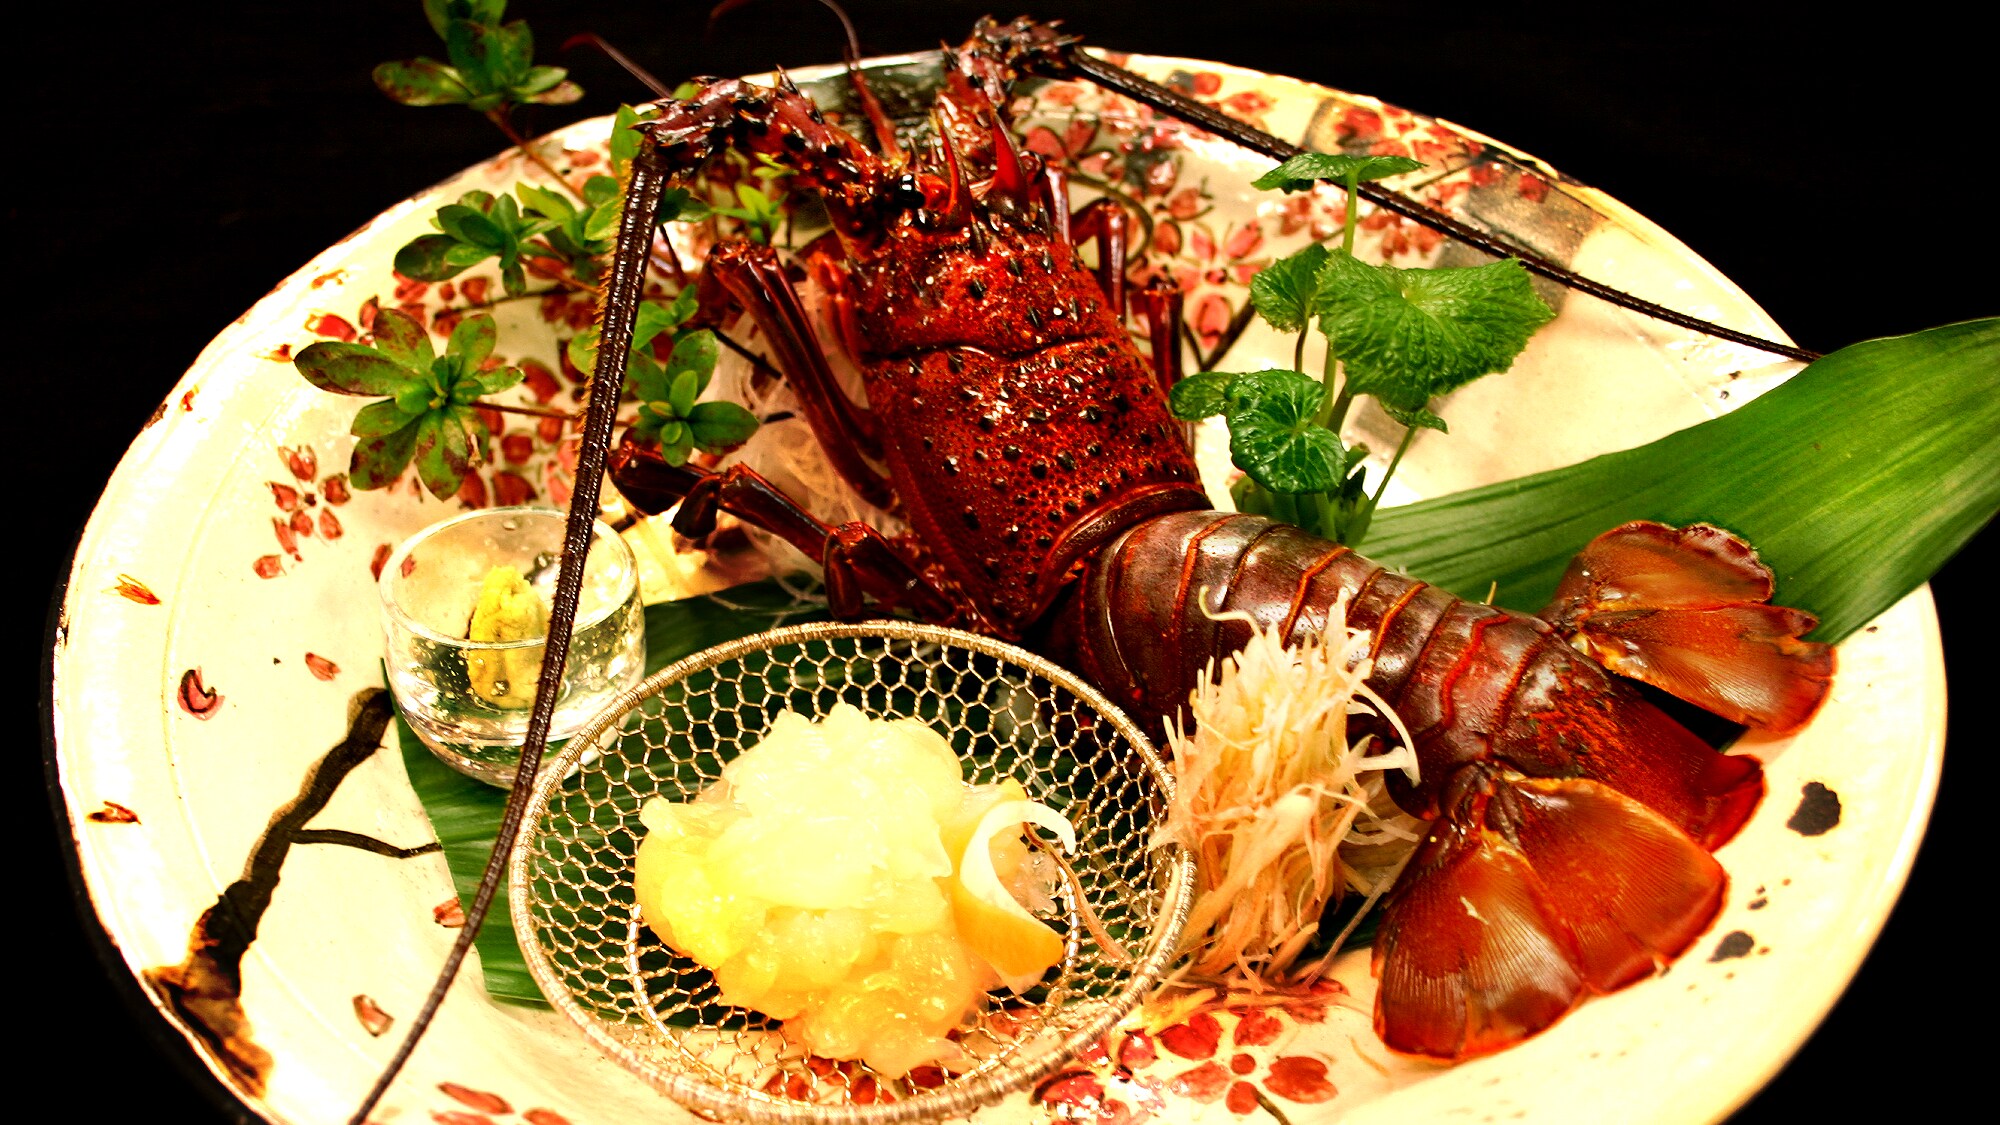 ◆ Special dish "Spiny lobster making"